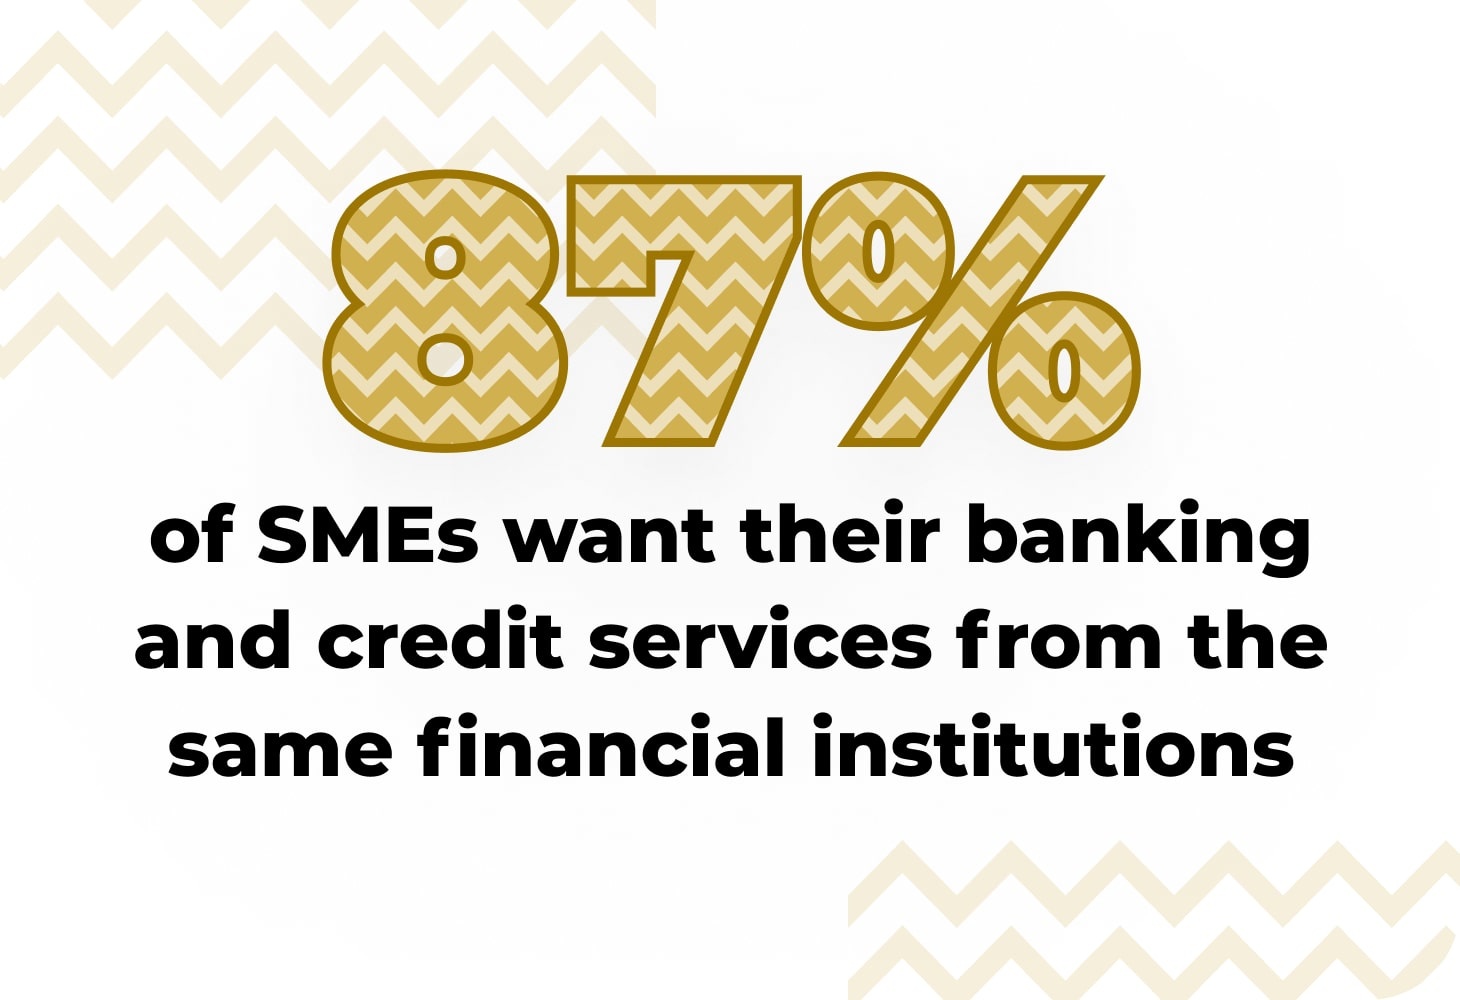 most SMEs want thei credit and banking services from the same place